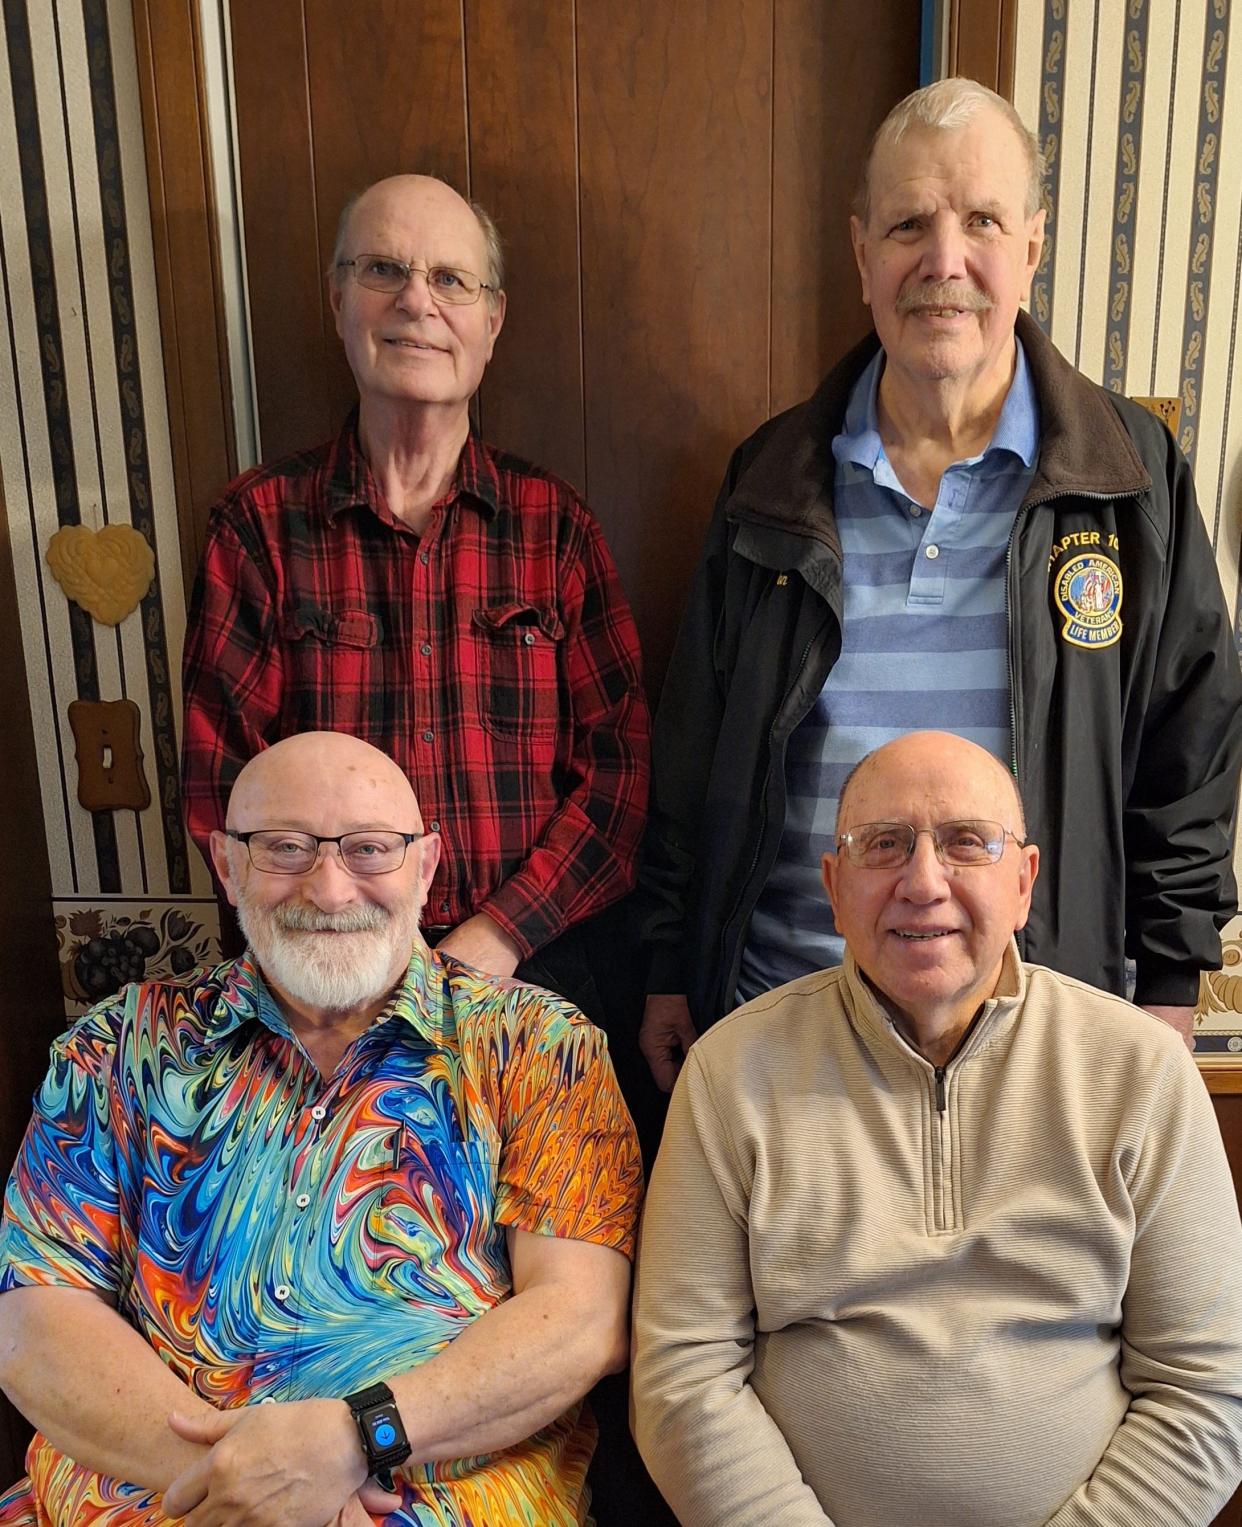 Members of Bucyrus Boy Scout Troop 40 gathered recently to reminisce about their Scouting years, including Bob Laipply, front left, Jim Phillips, Howard Naufzinger, back left, and Don Scheerer.